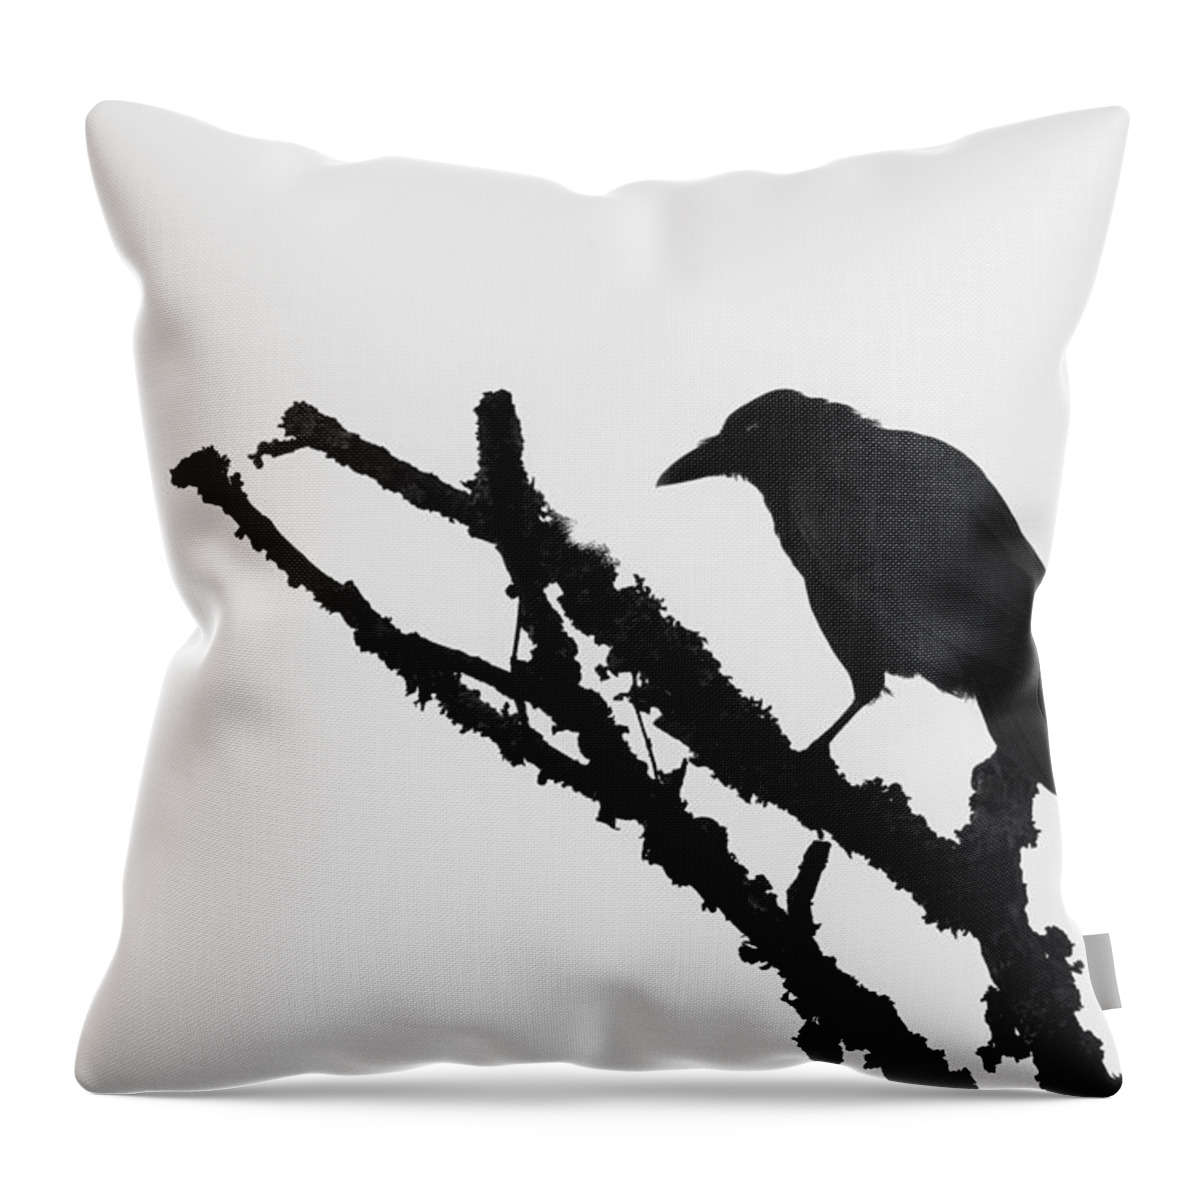 Rave Throw Pillow featuring the photograph The Raven by Ken Barrett